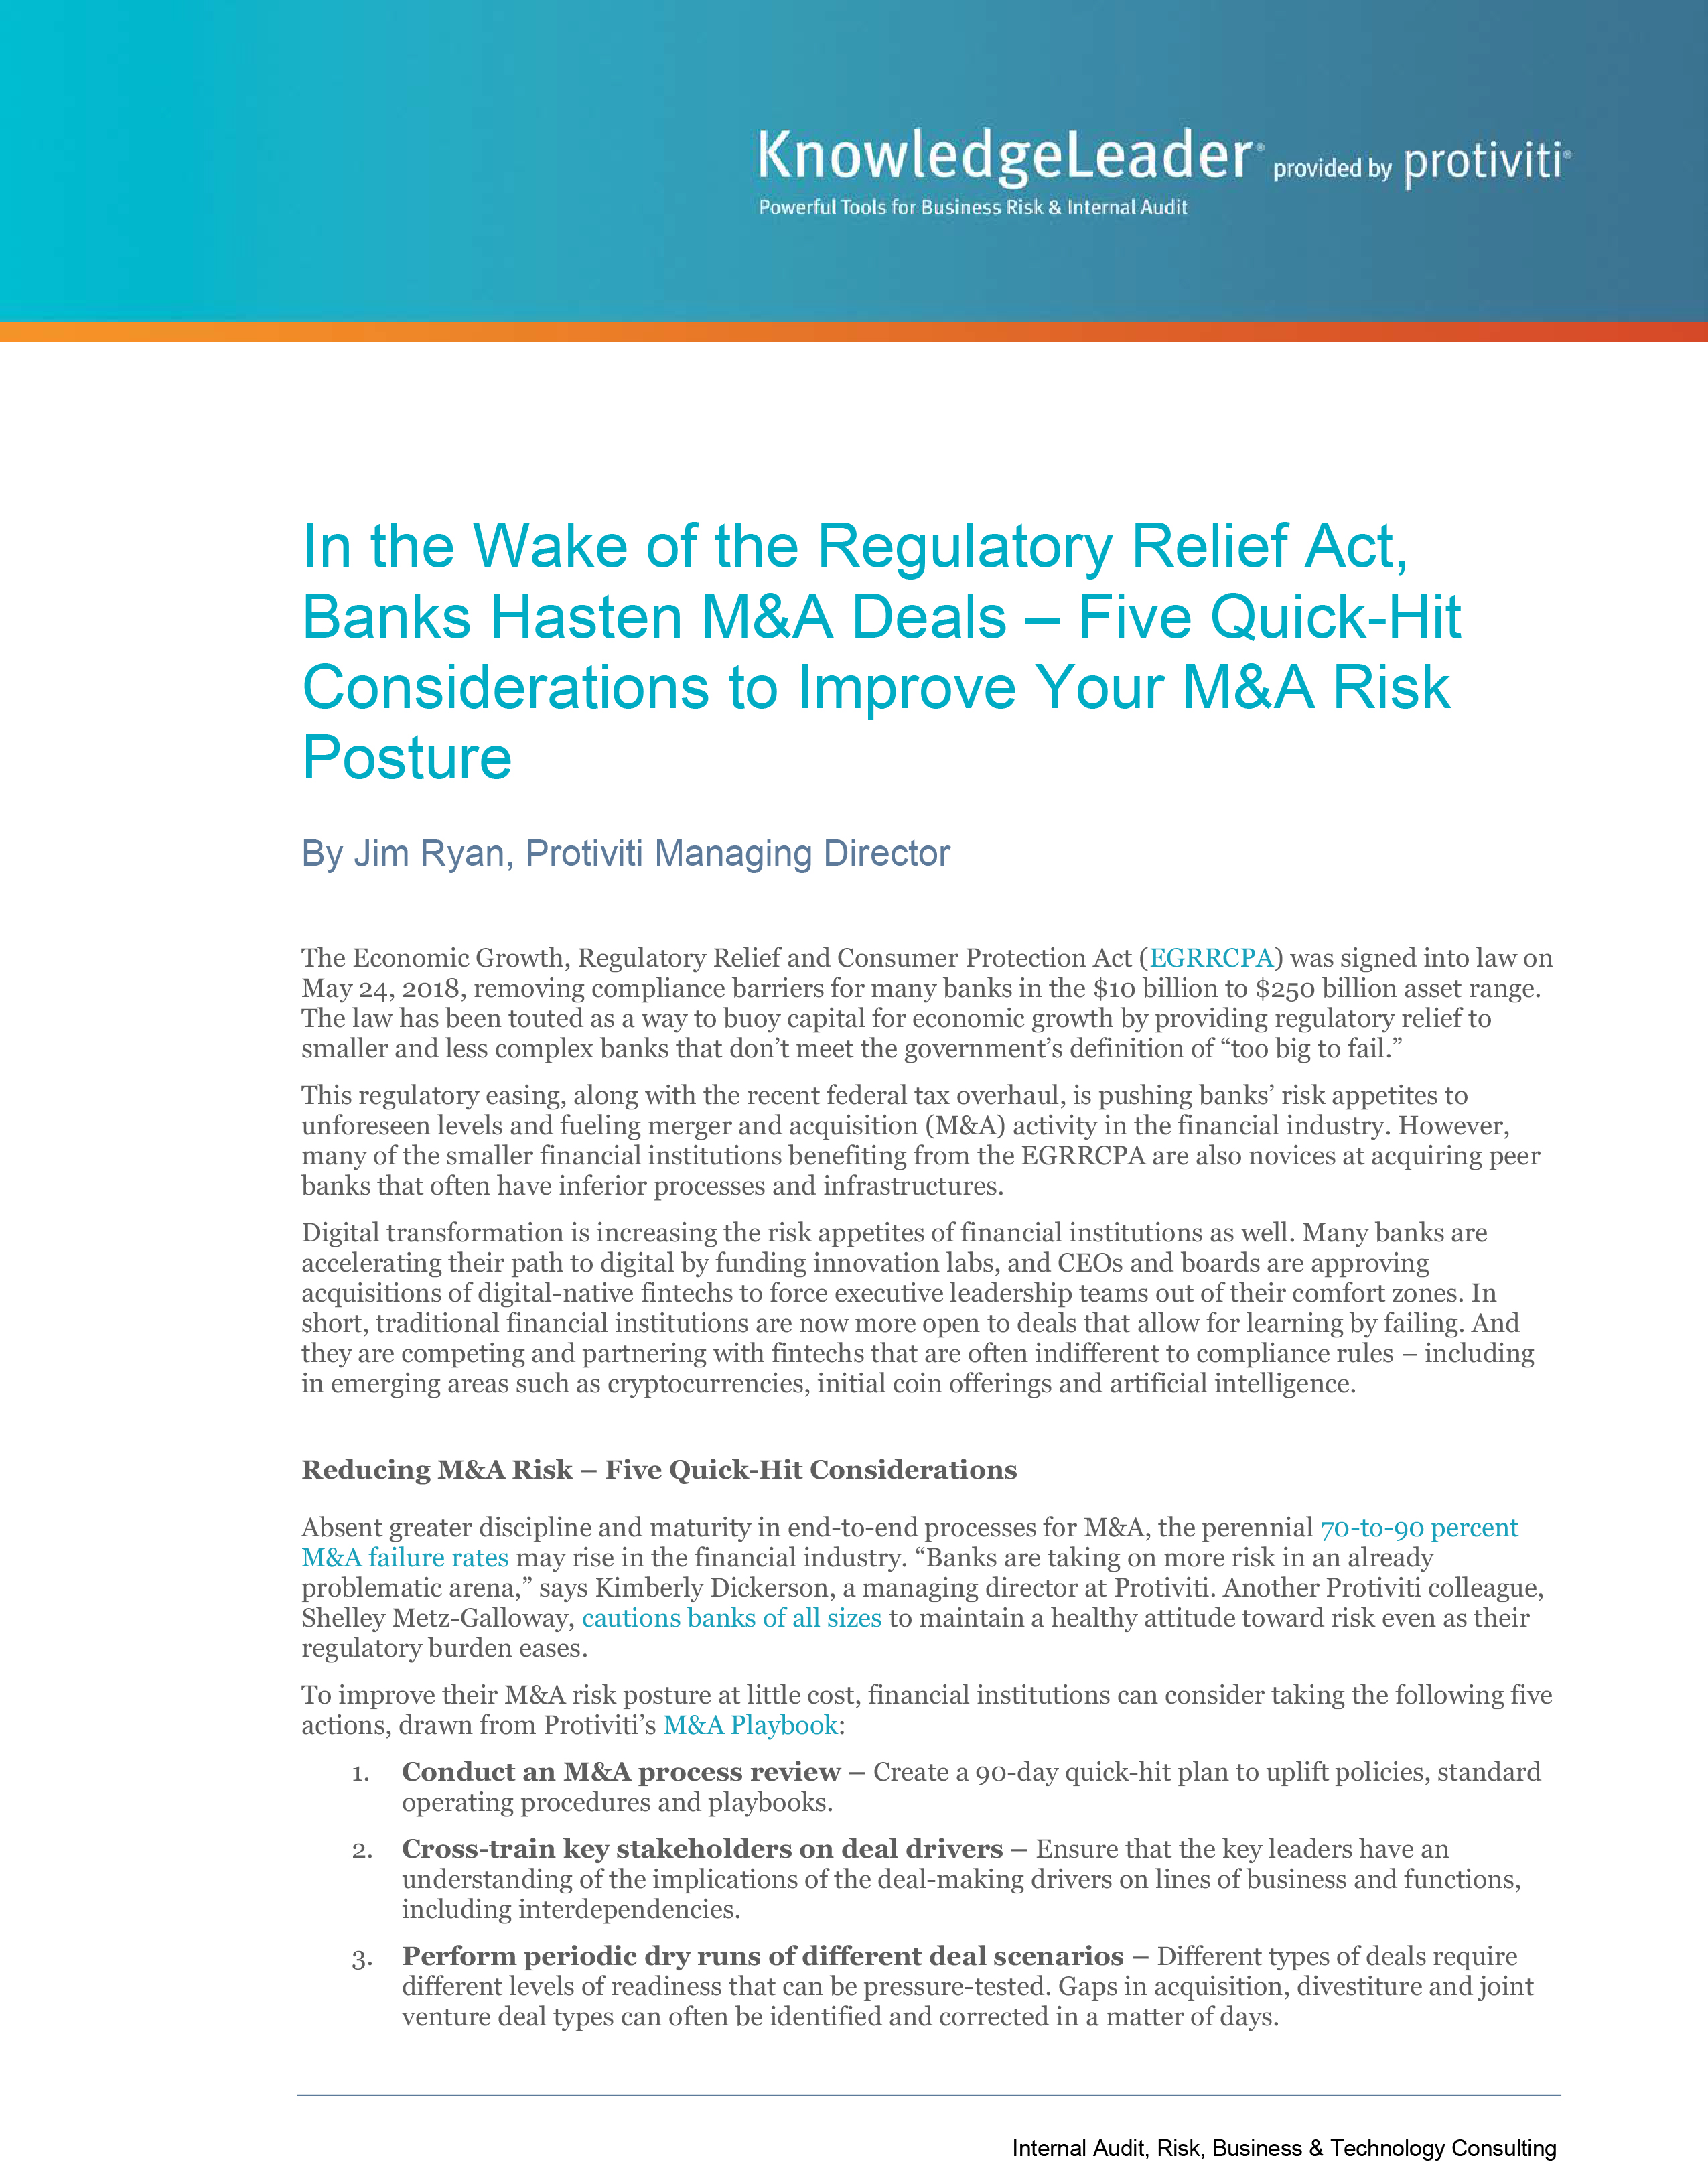 Screenshot of the first page of In the Wake of the Regulatory Relief Act, Banks Hasten MA Deals